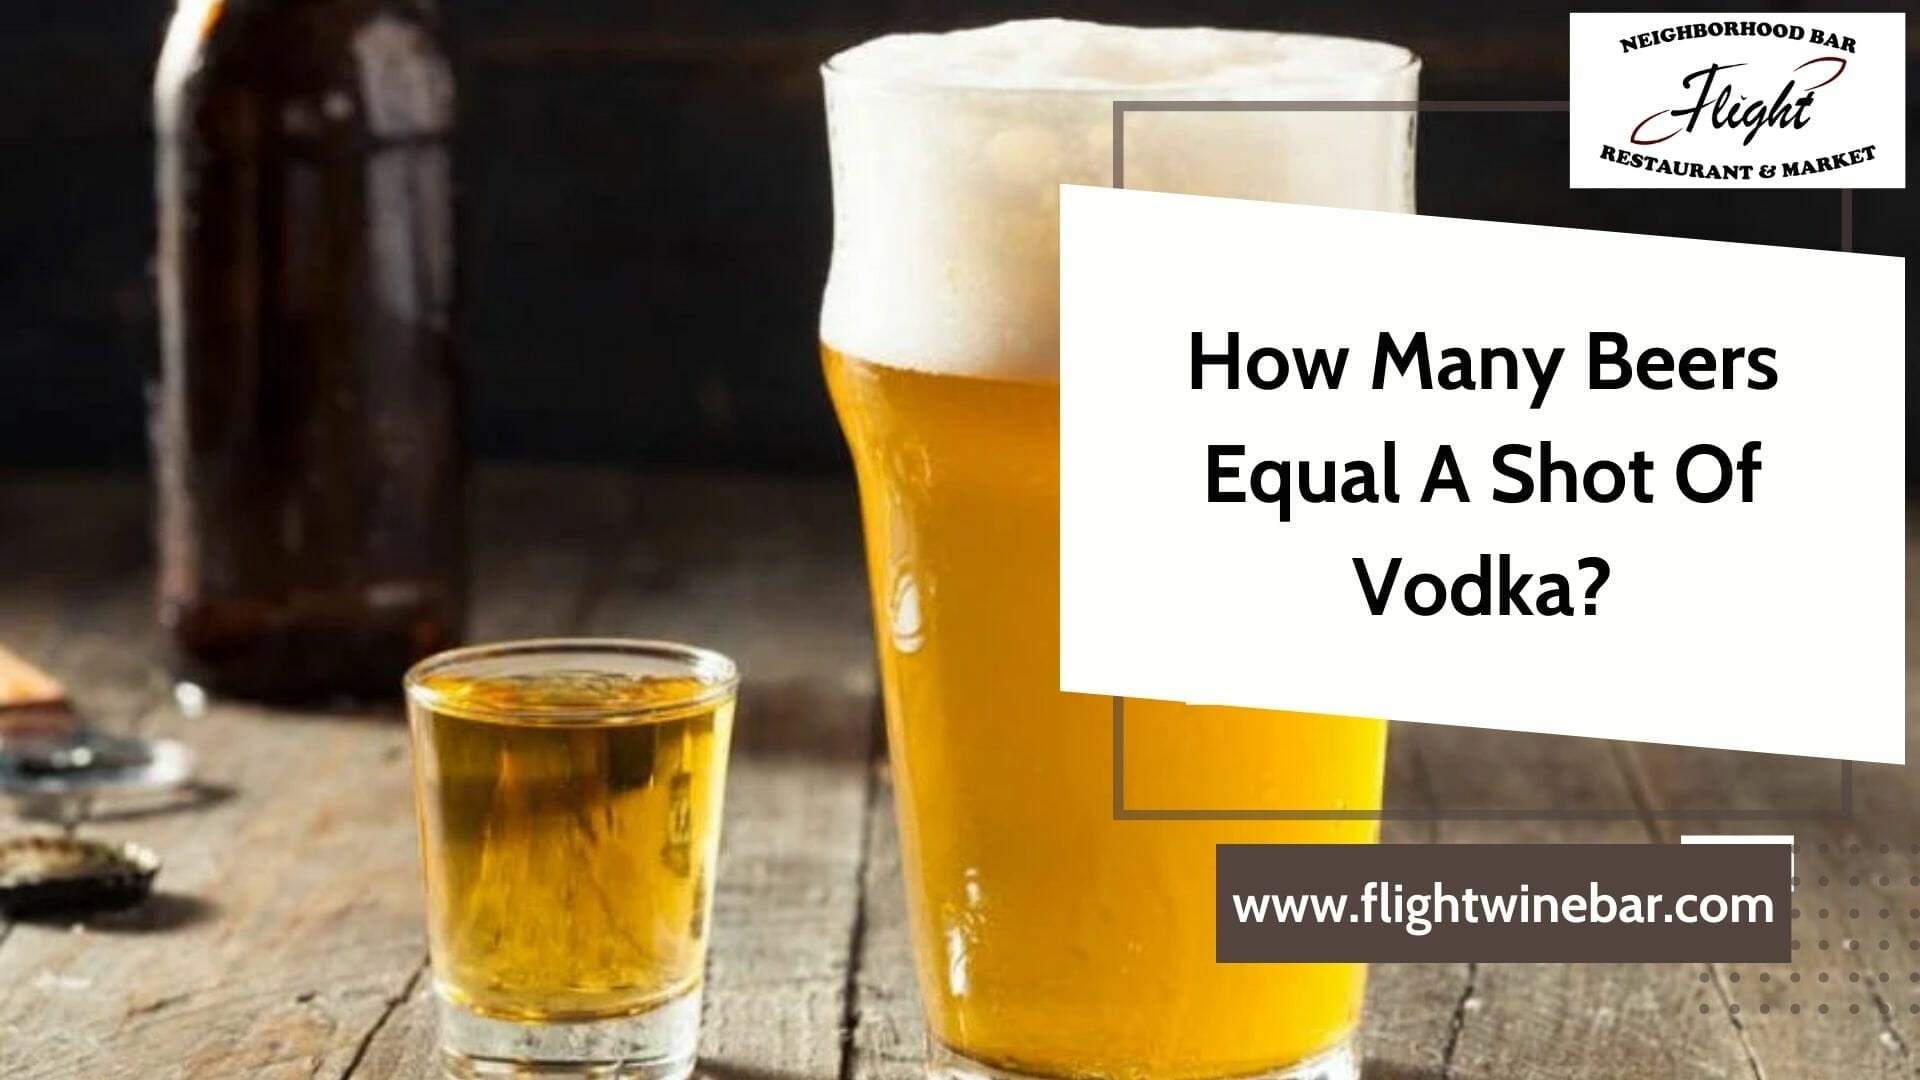 How Many Beers Equal A Shot Of Vodka